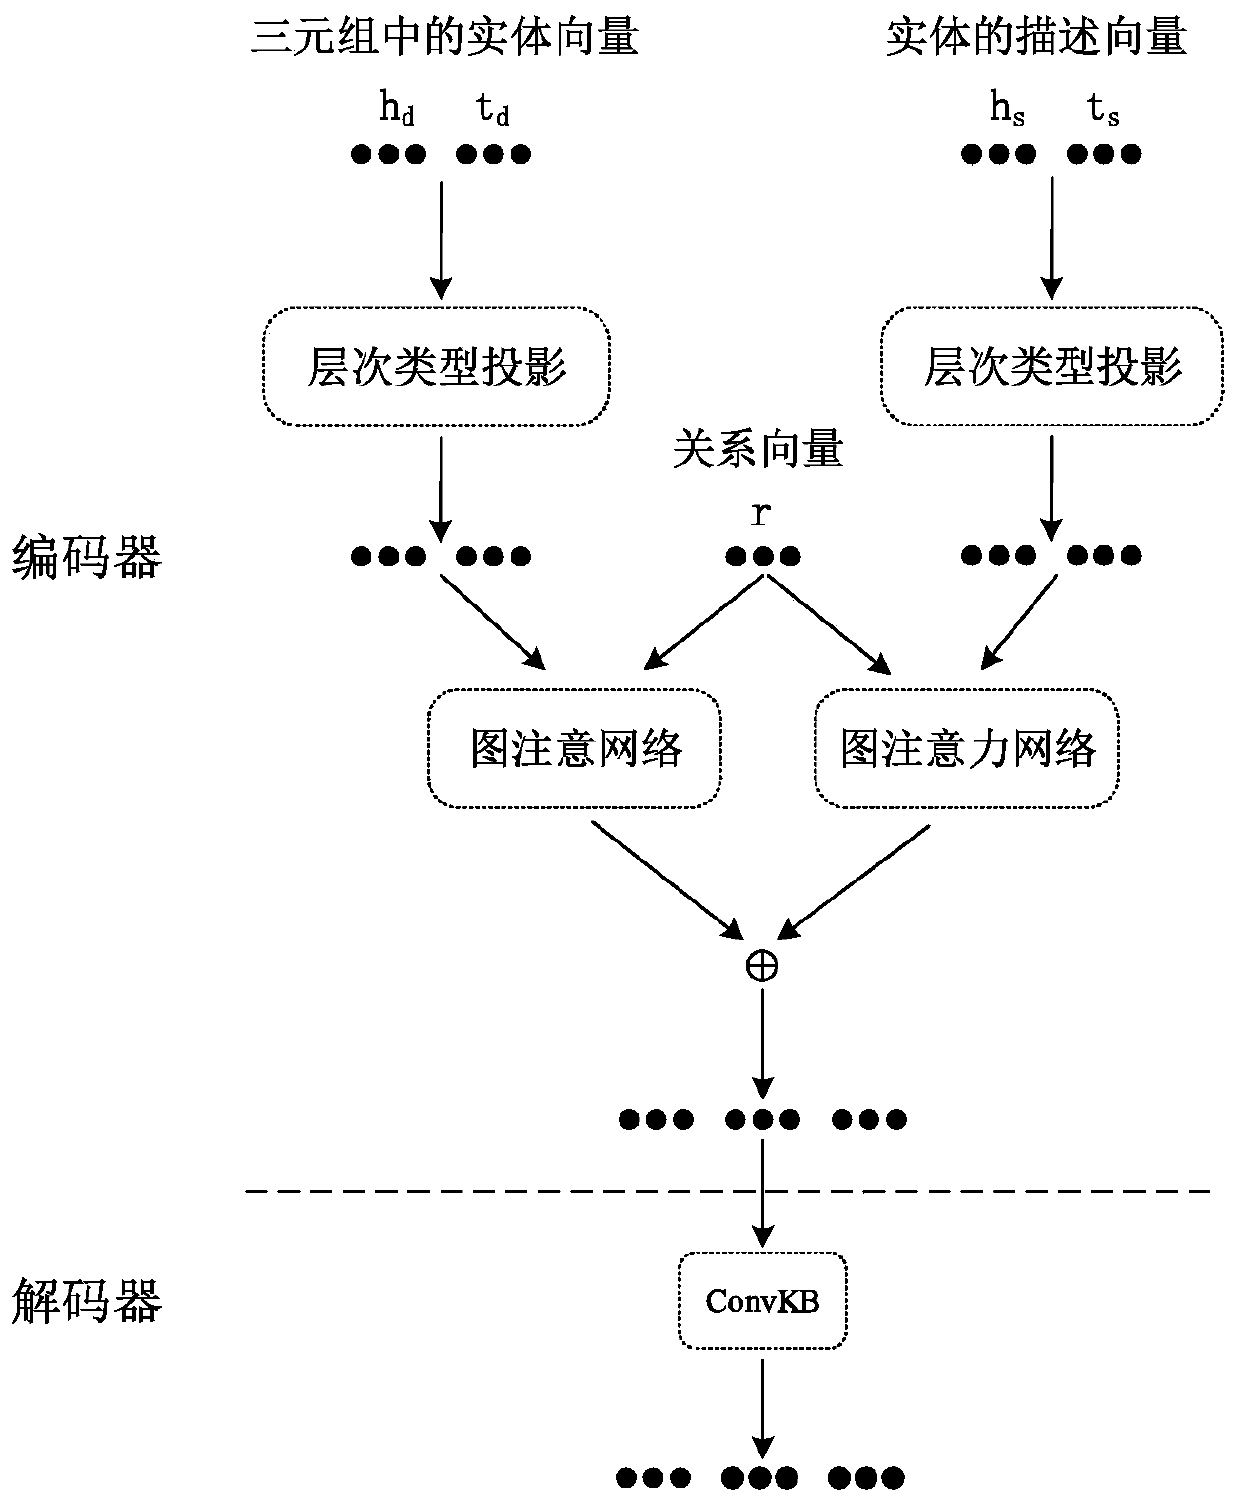 Knowledge representation learning method fusing multi-source information